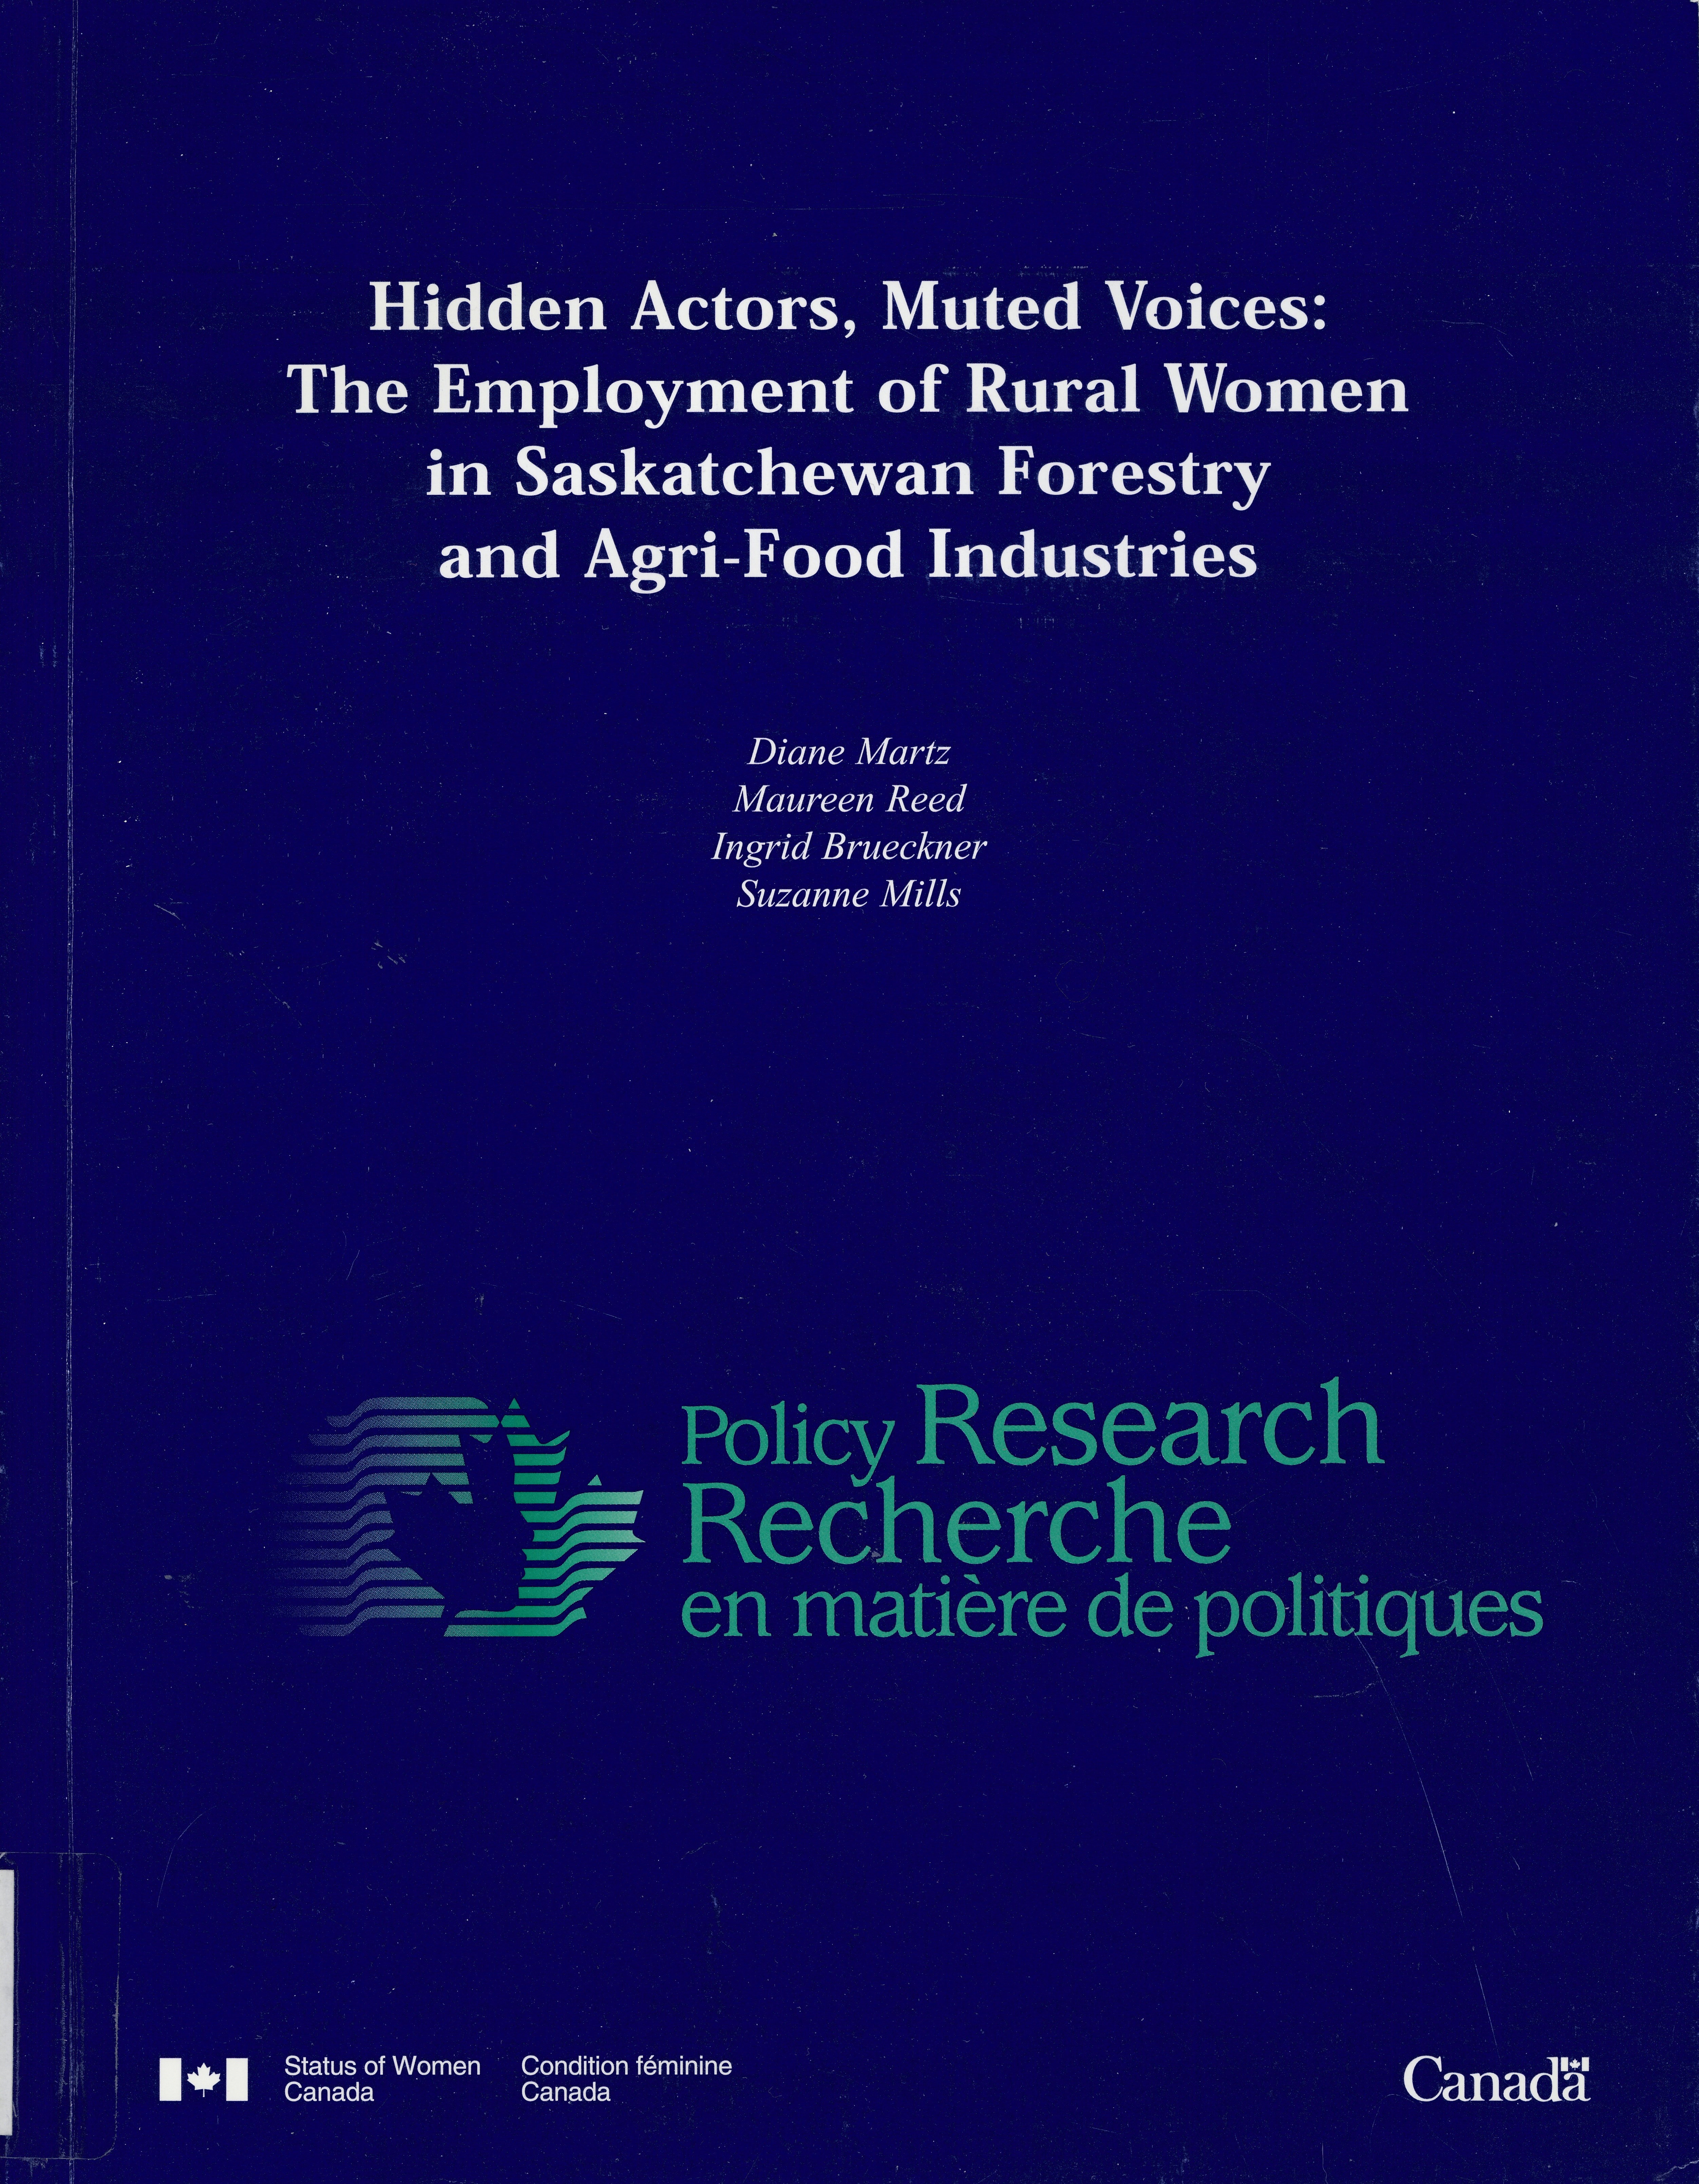 Hidden actors, muted voices : the employment of rural women in Saskatchewan forestry and agri-food industries